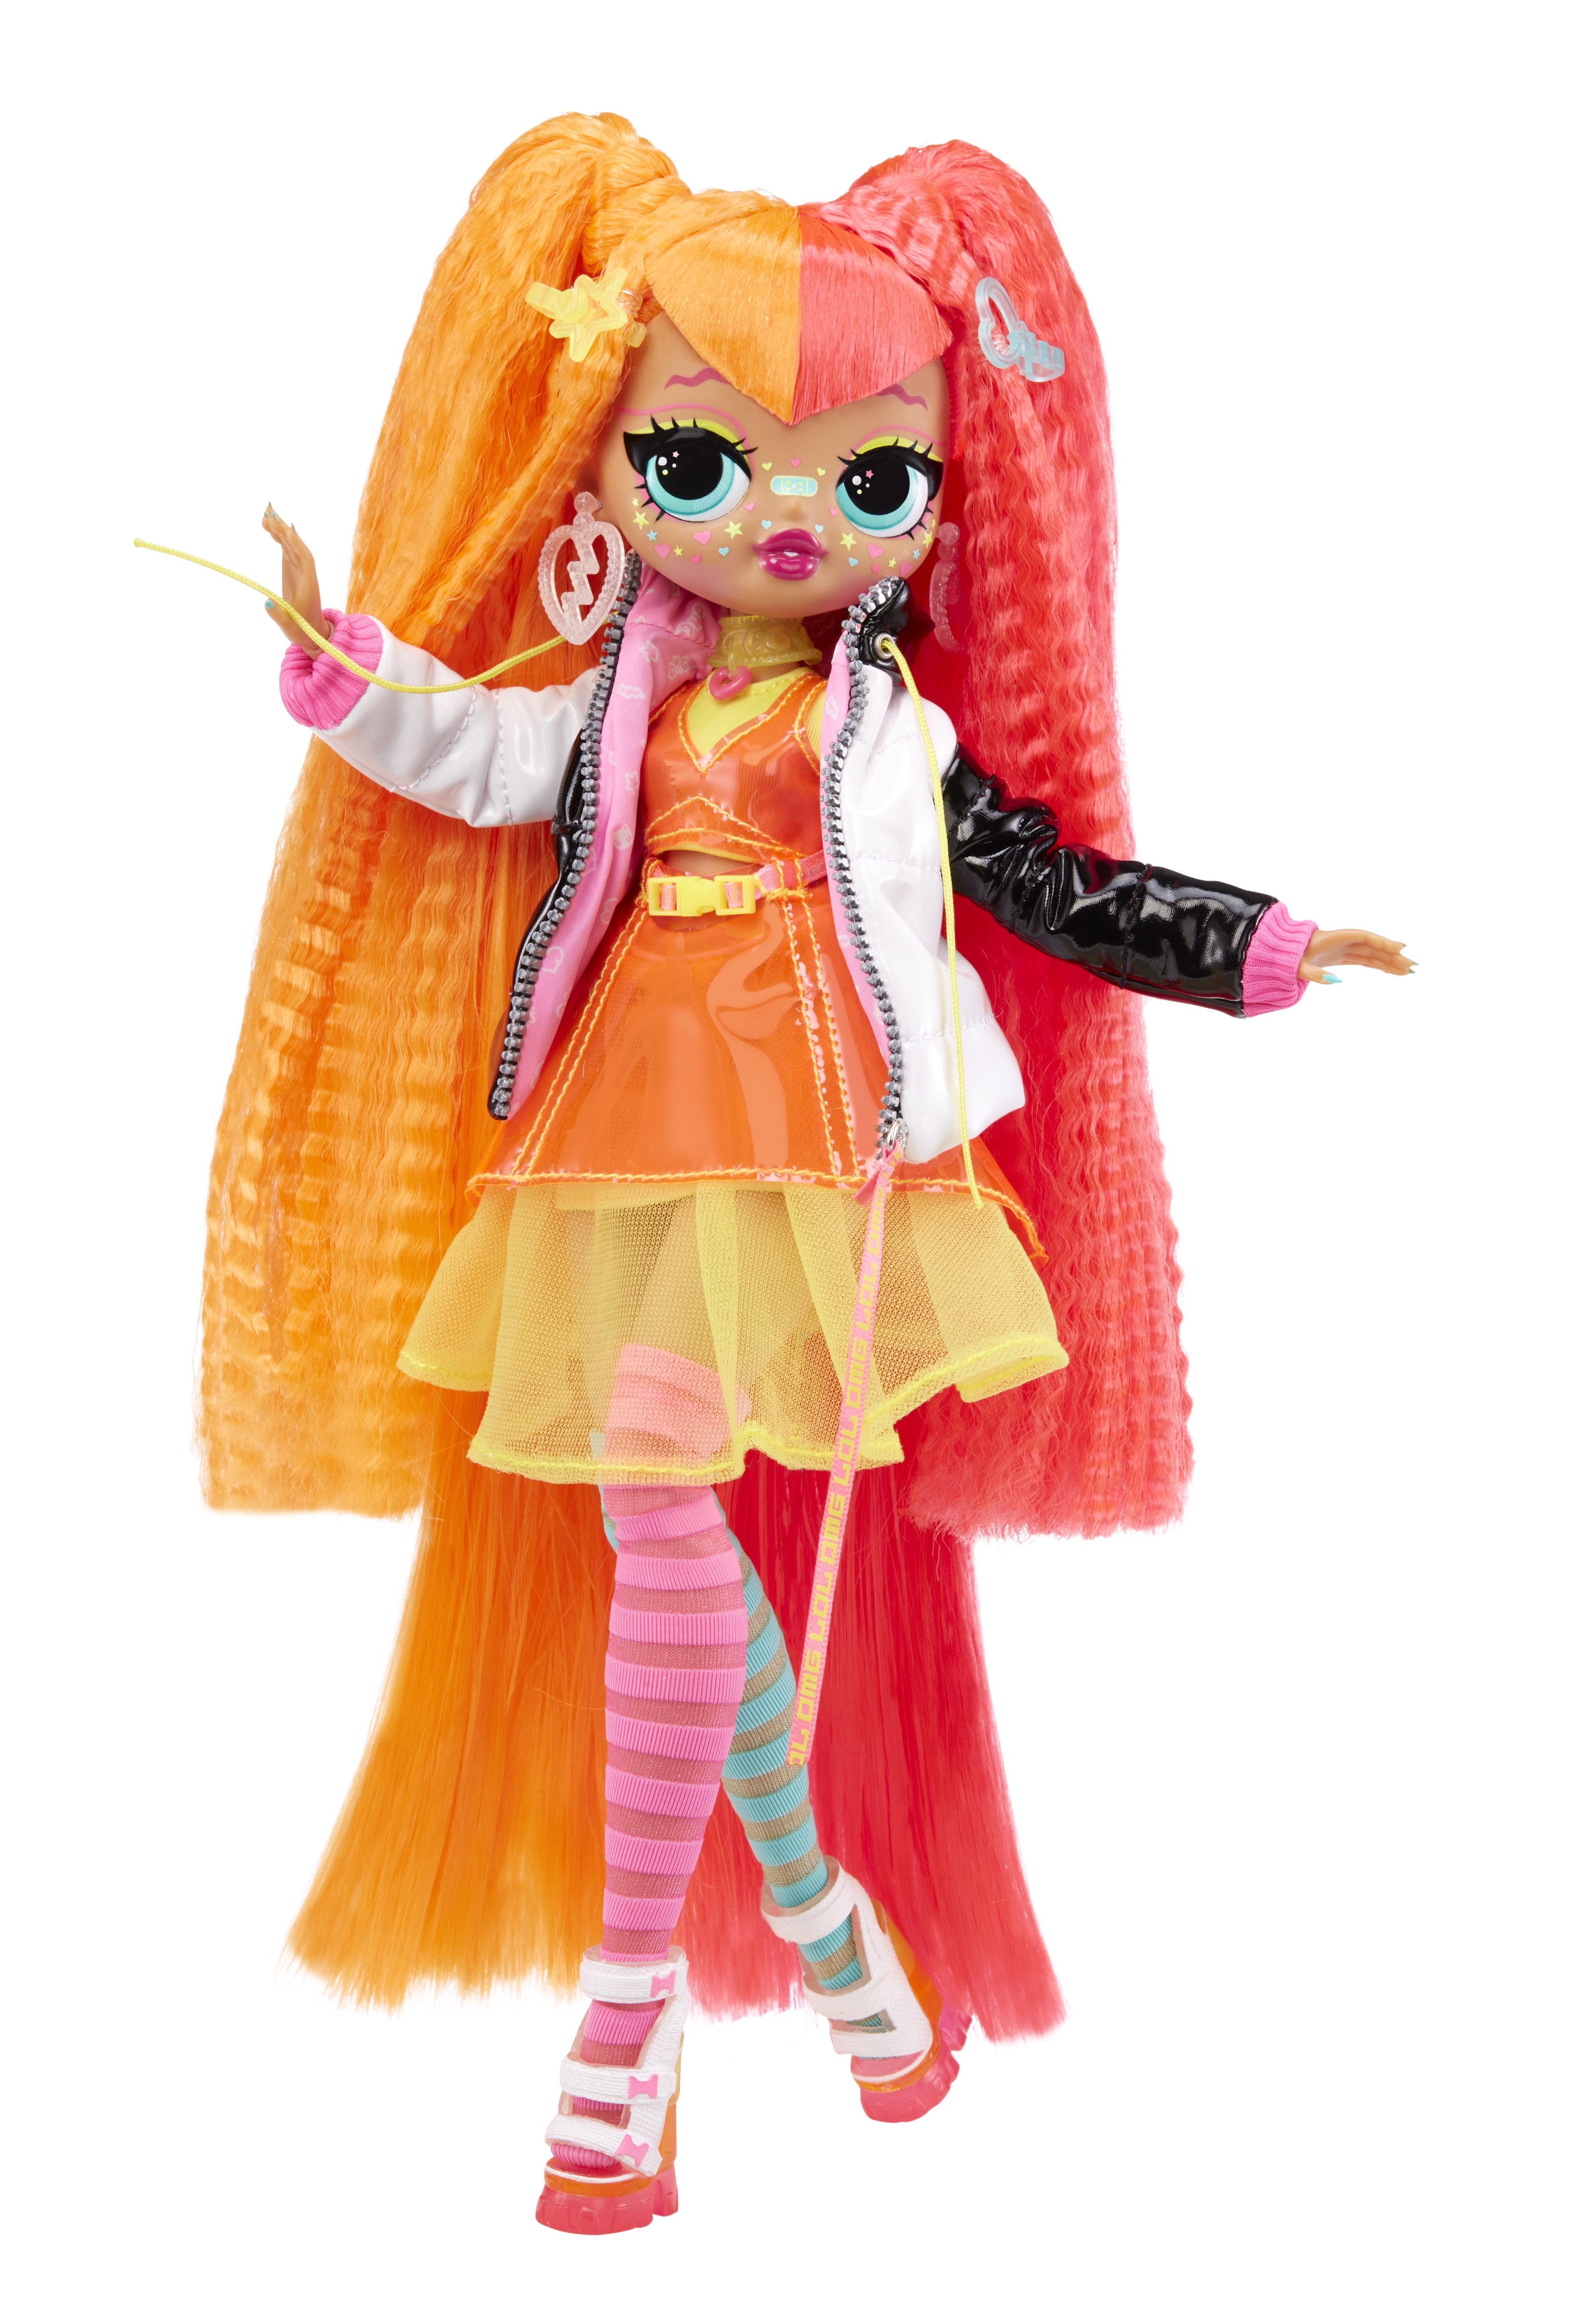 LOL Surprise OMG Fierce Neonlicious fashion doll with 15 Surprises Including Outfits and Accessories for Fashion Toy, Girls Ages 3 and up, 11.5-inch doll, Collector